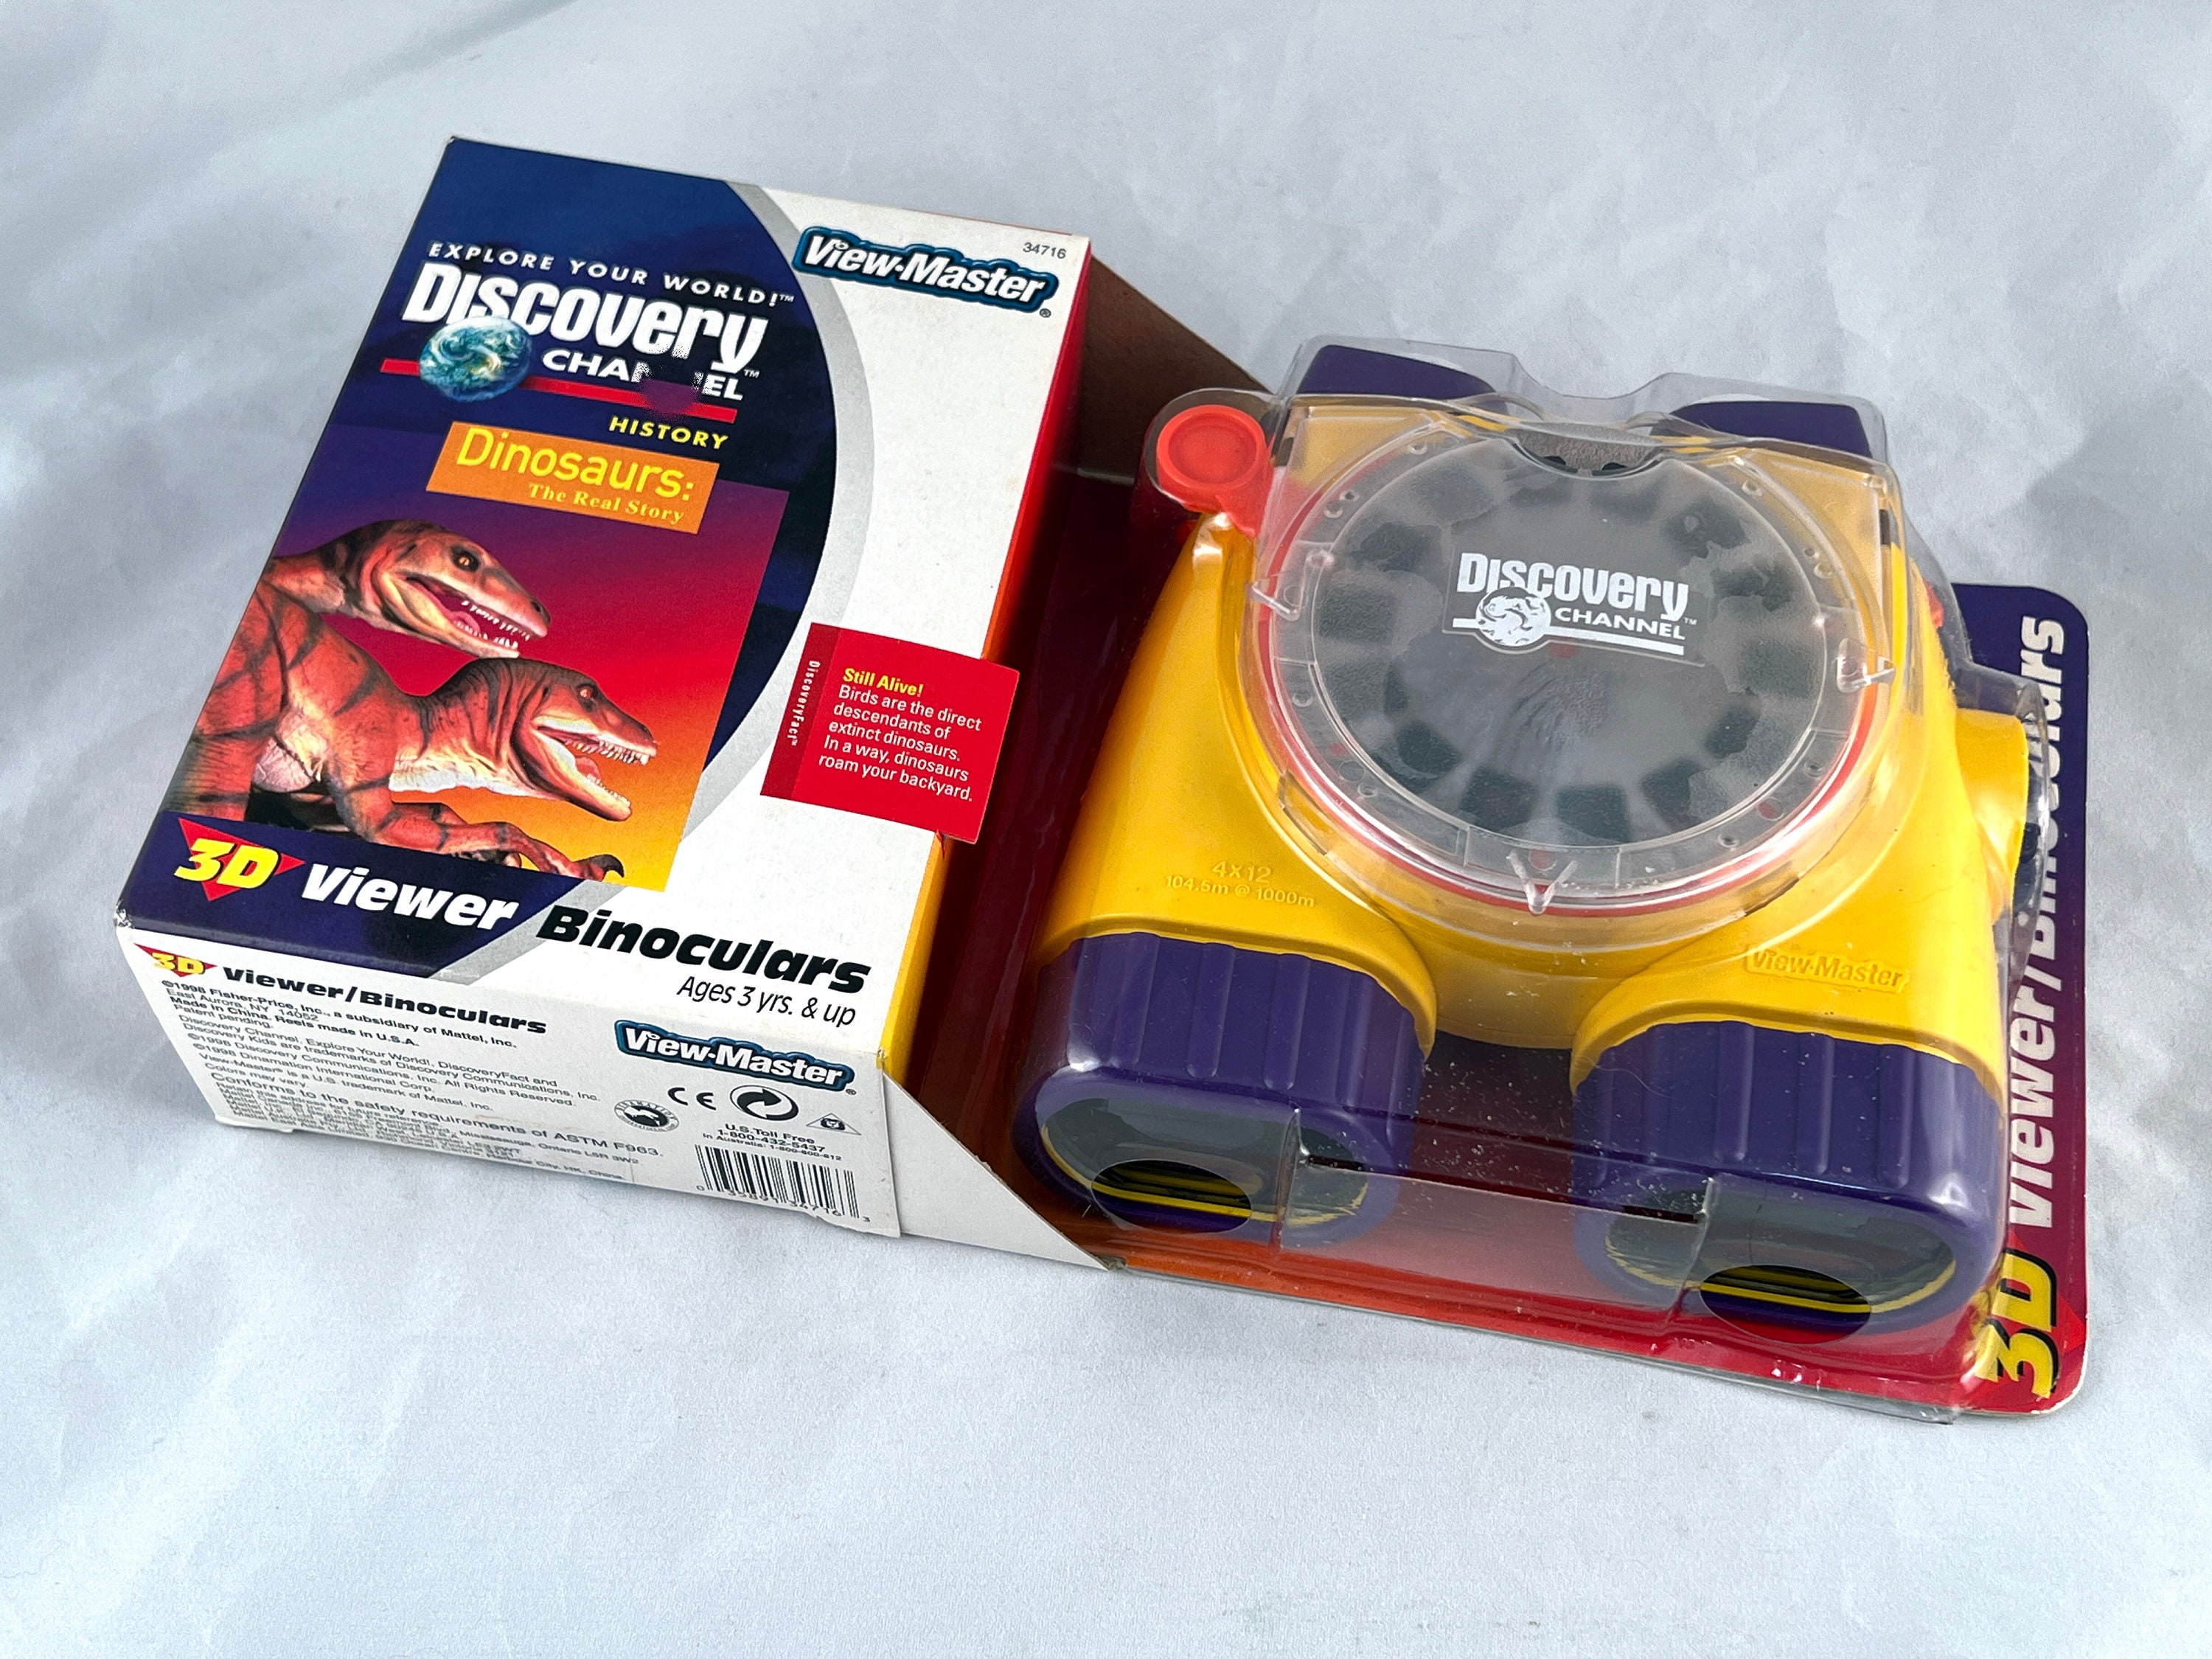 SALE Discovery Channel 3-D View-master Viewer / Binoculars Set, With 3D  Reels of Dinosaurs, Reel Storage Case, NIB, 1998, STEM, Ages 3 